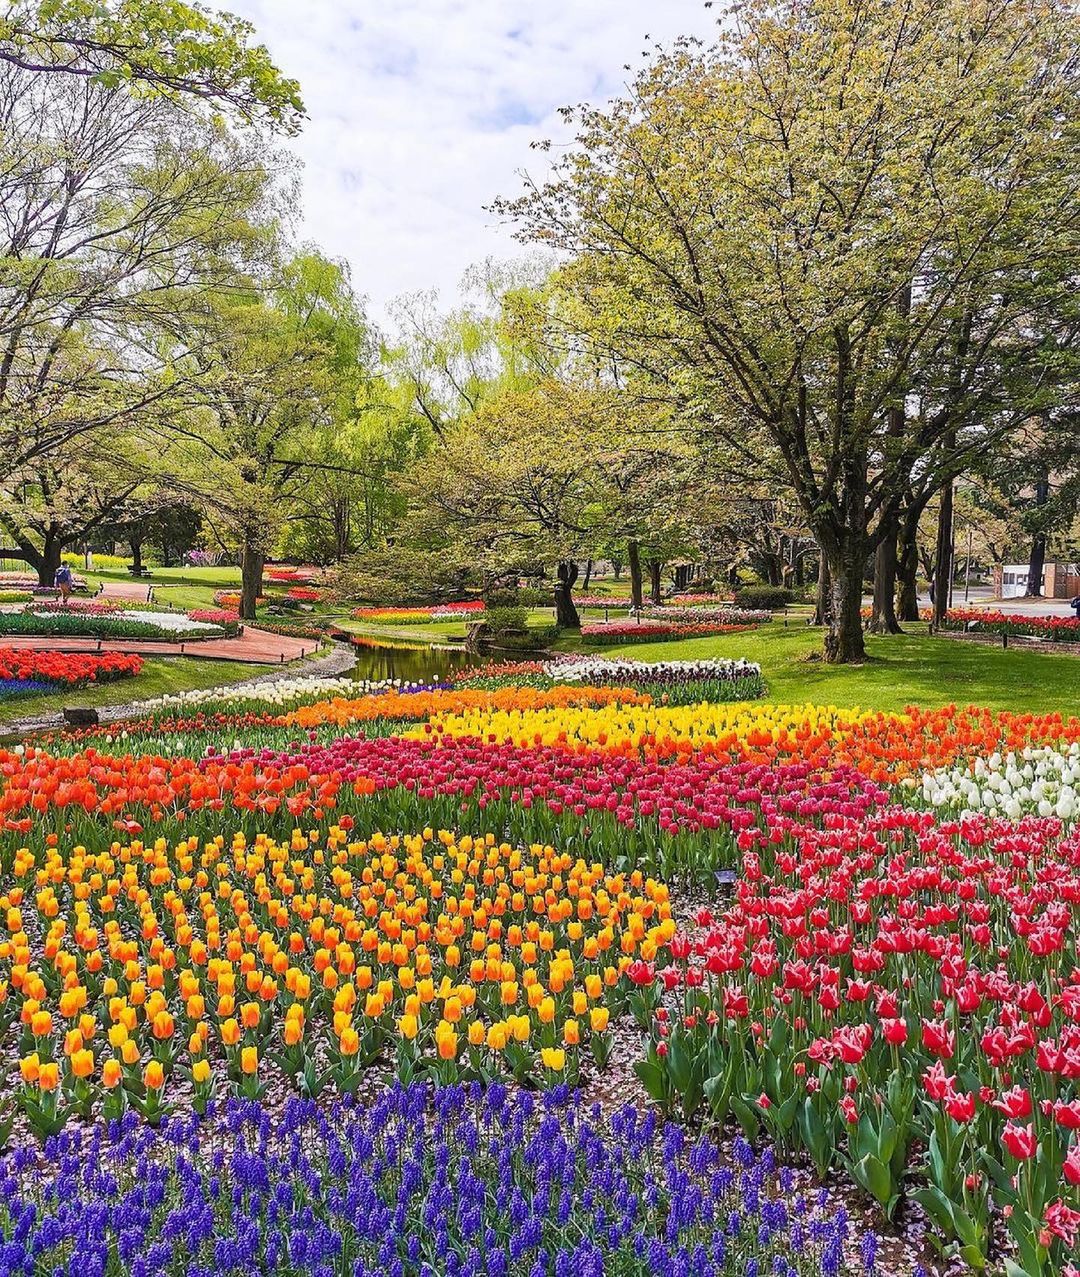 Visit Japan: Flower power at Showa Memorial Park in Tokyo! With over ...